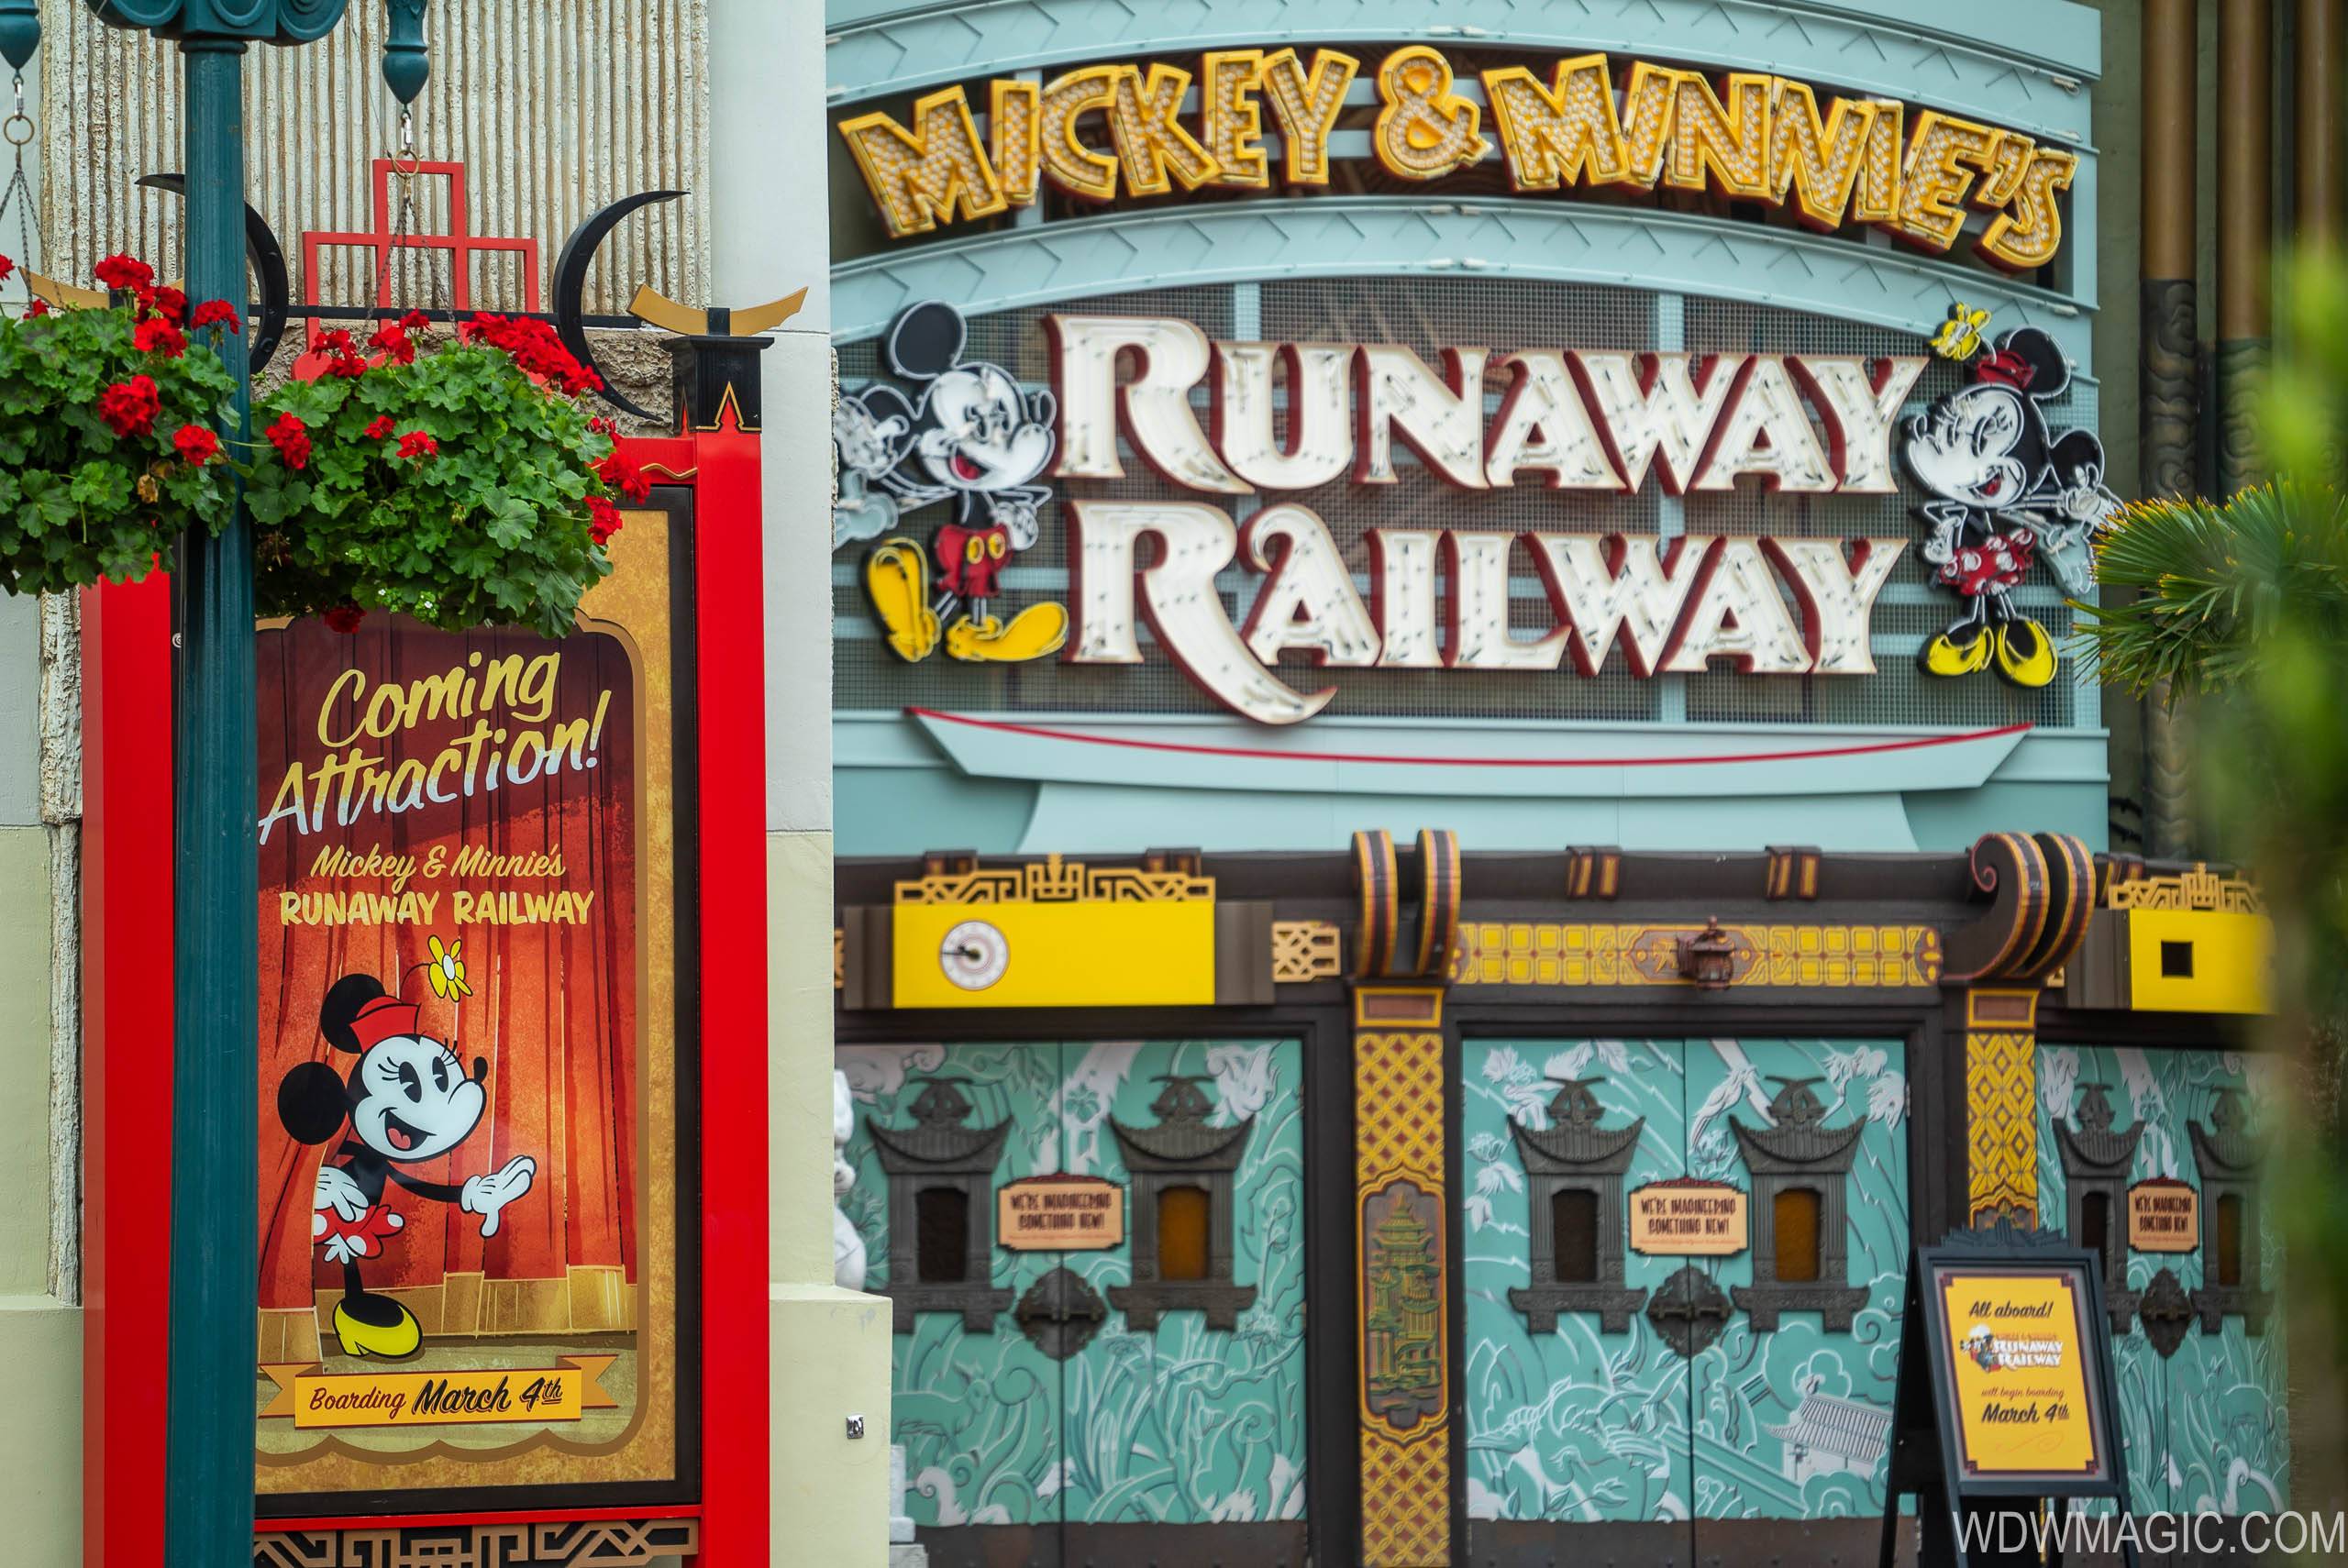 First ride impressions of Mickey and Minnie's Runaway Railway